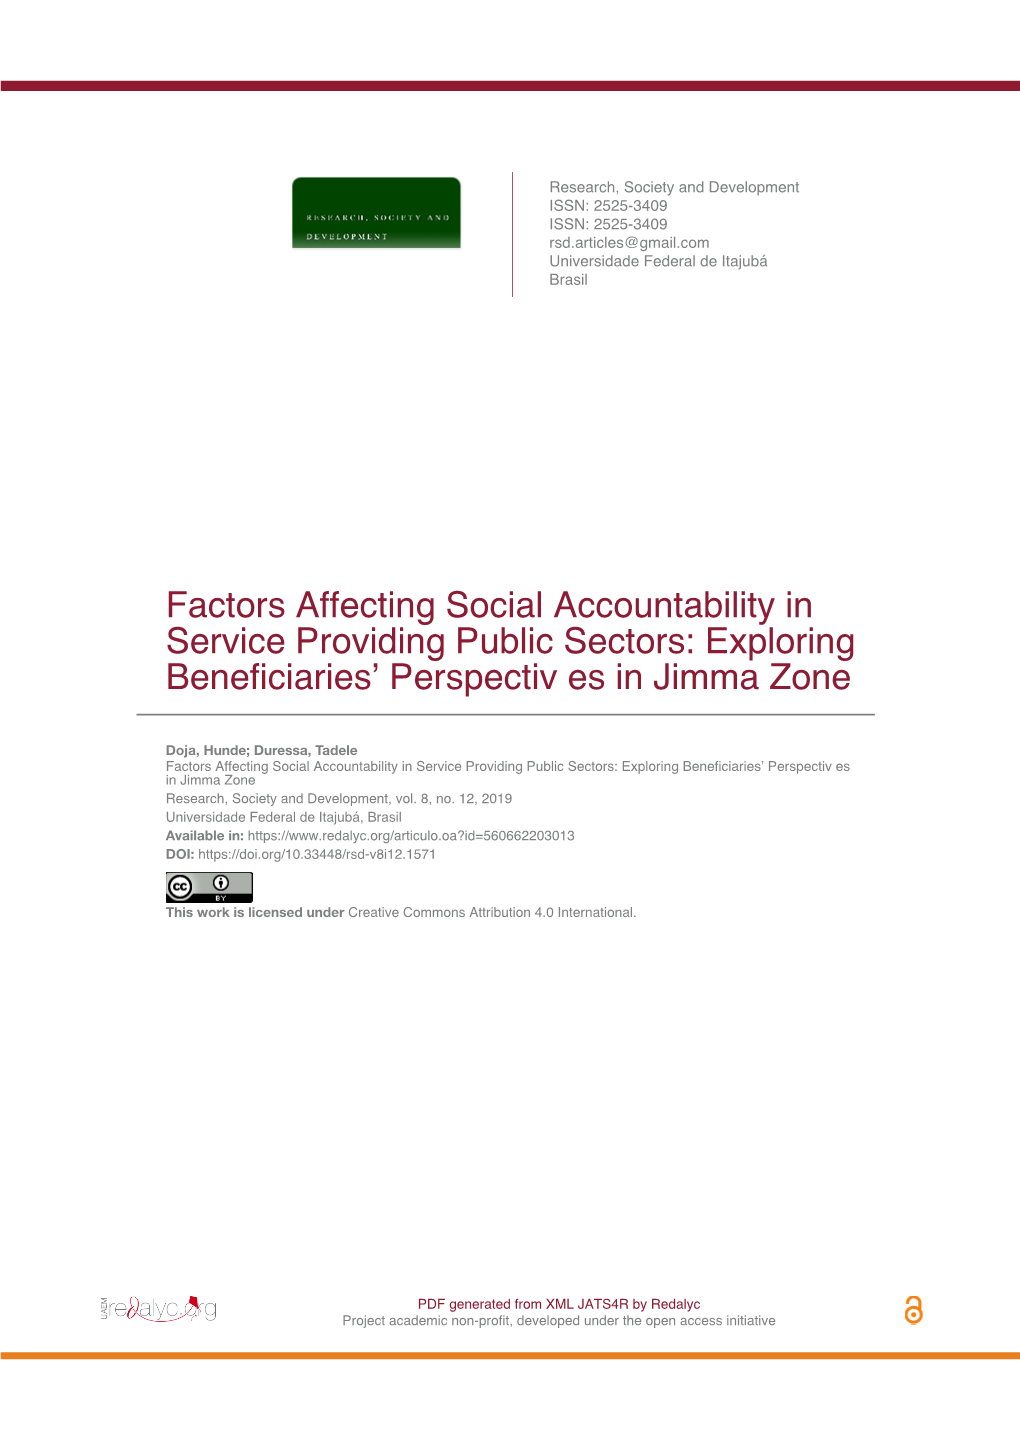 Factors Affecting Social Accountability in Service Providing Public Sectors: Exploring Beneficiaries' Perspectiv Es in Jimma Z